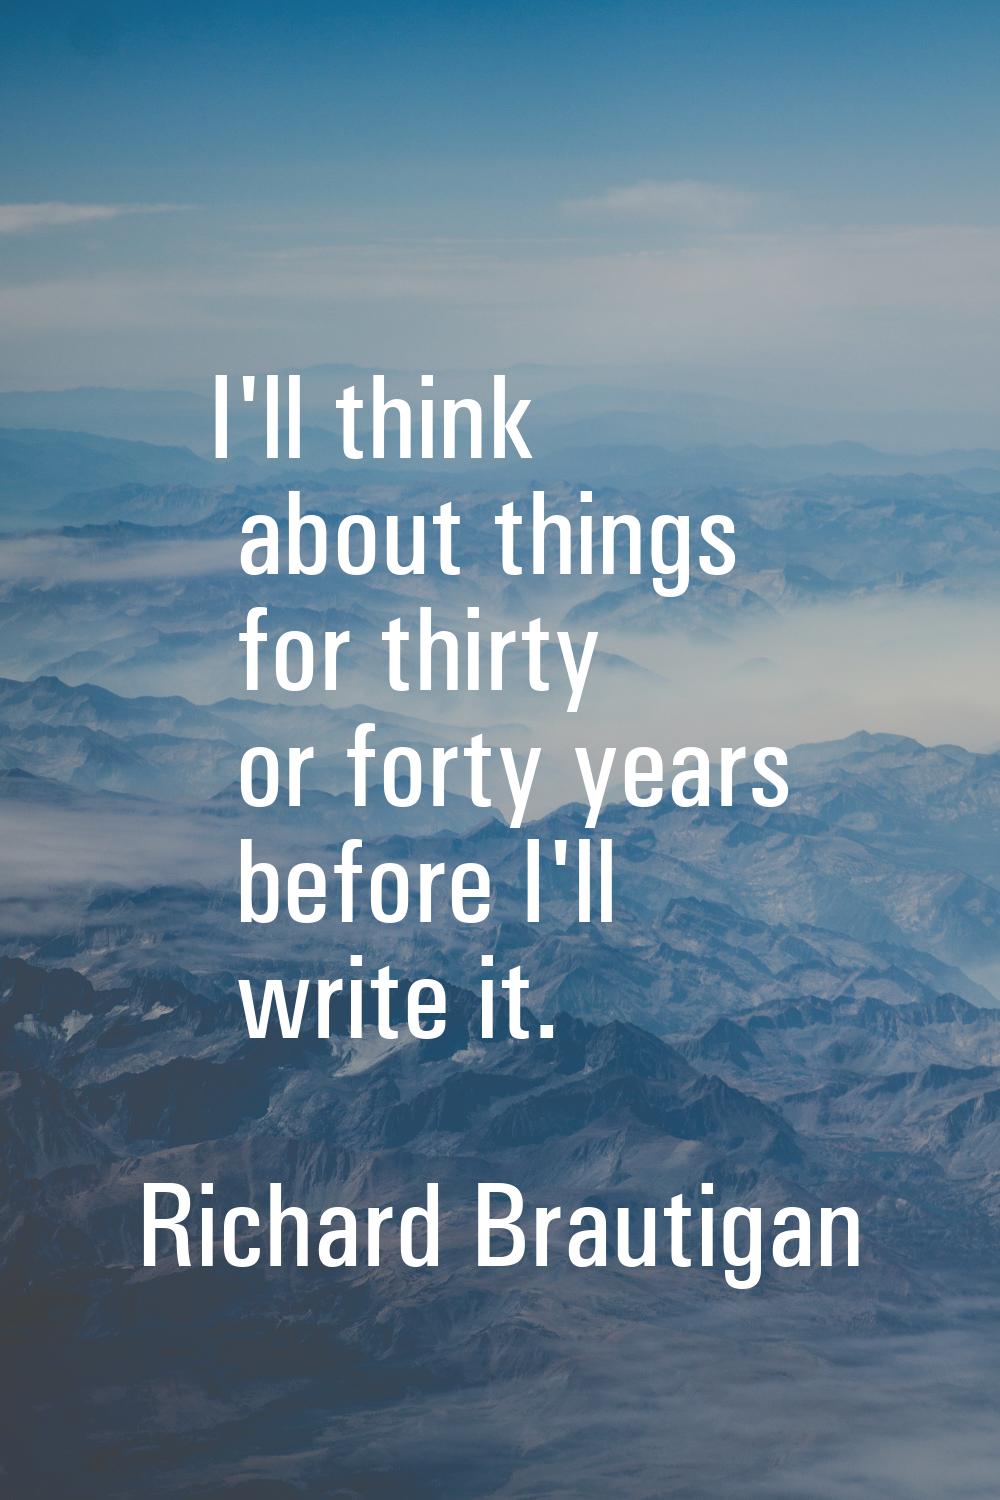 I'll think about things for thirty or forty years before I'll write it.